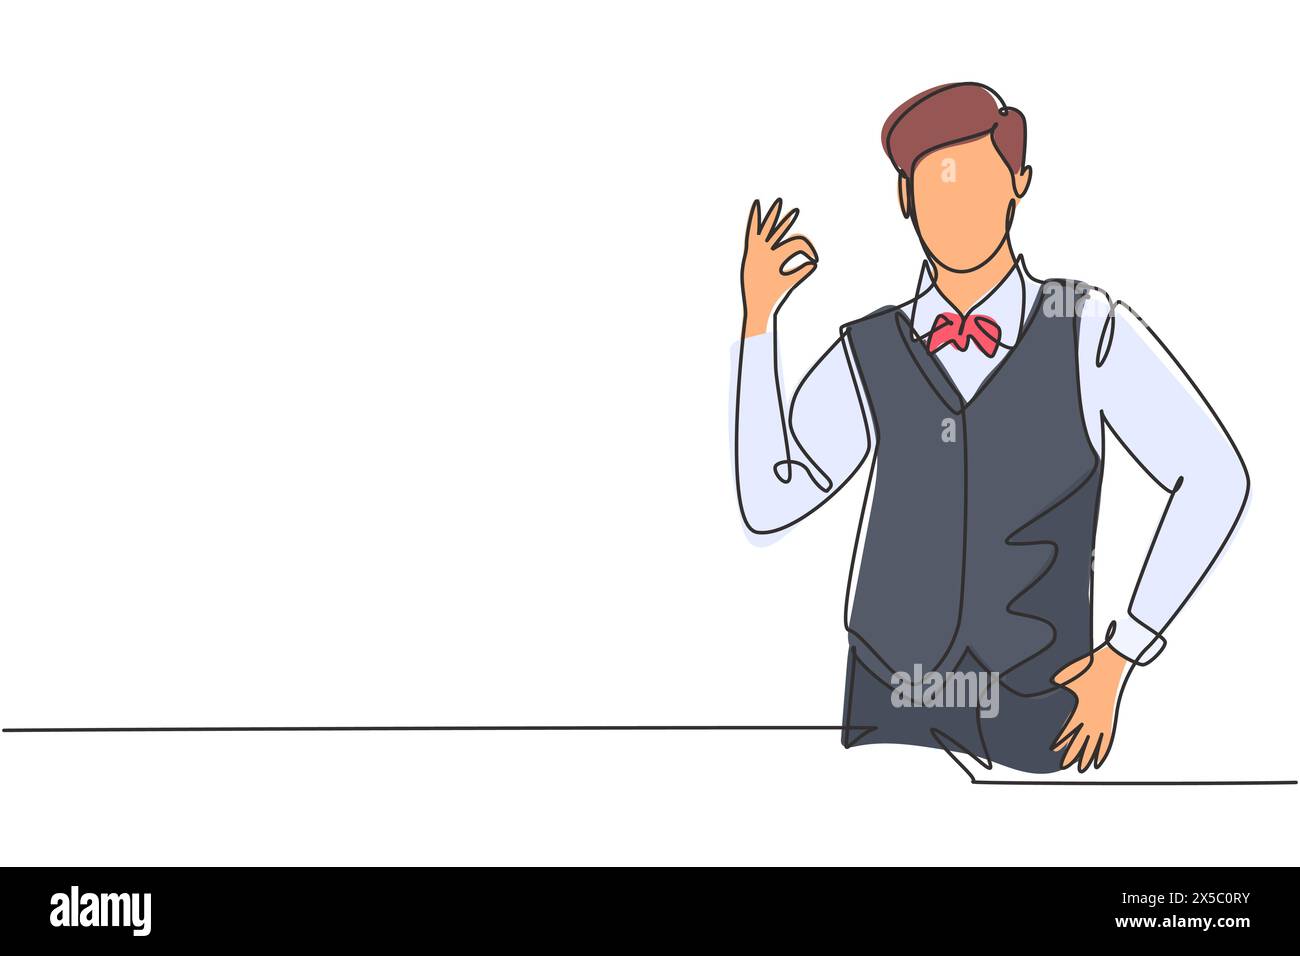 Single one line drawing of steward with gesture okay ready to serve airplane passengers in a friendly and warm manner. Professional work. Modern conti Stock Vector